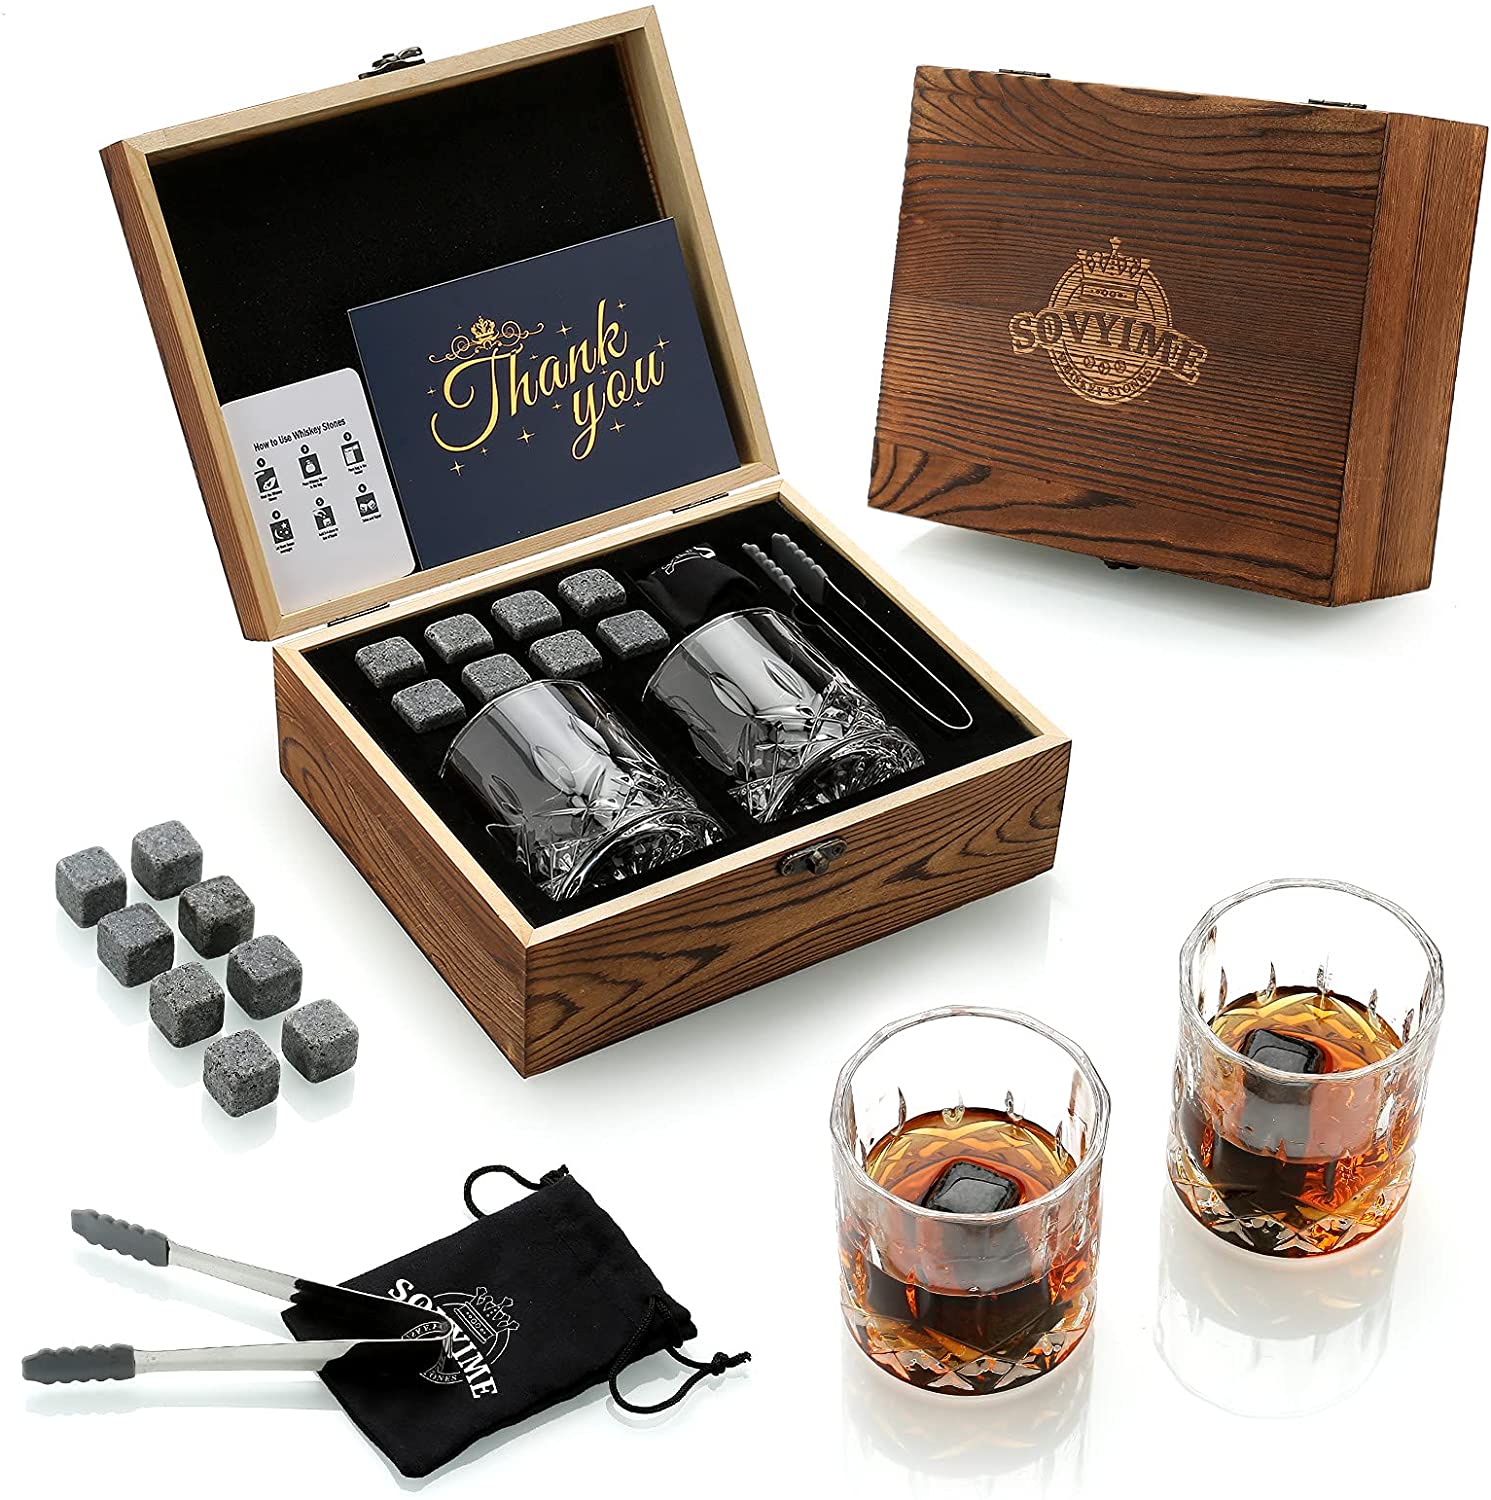 Whisky glass Scotch Glasses 8 Granite Chilling Rocks in Wooden Gift Box Burbon Present for Whisky Lovers Featured Image